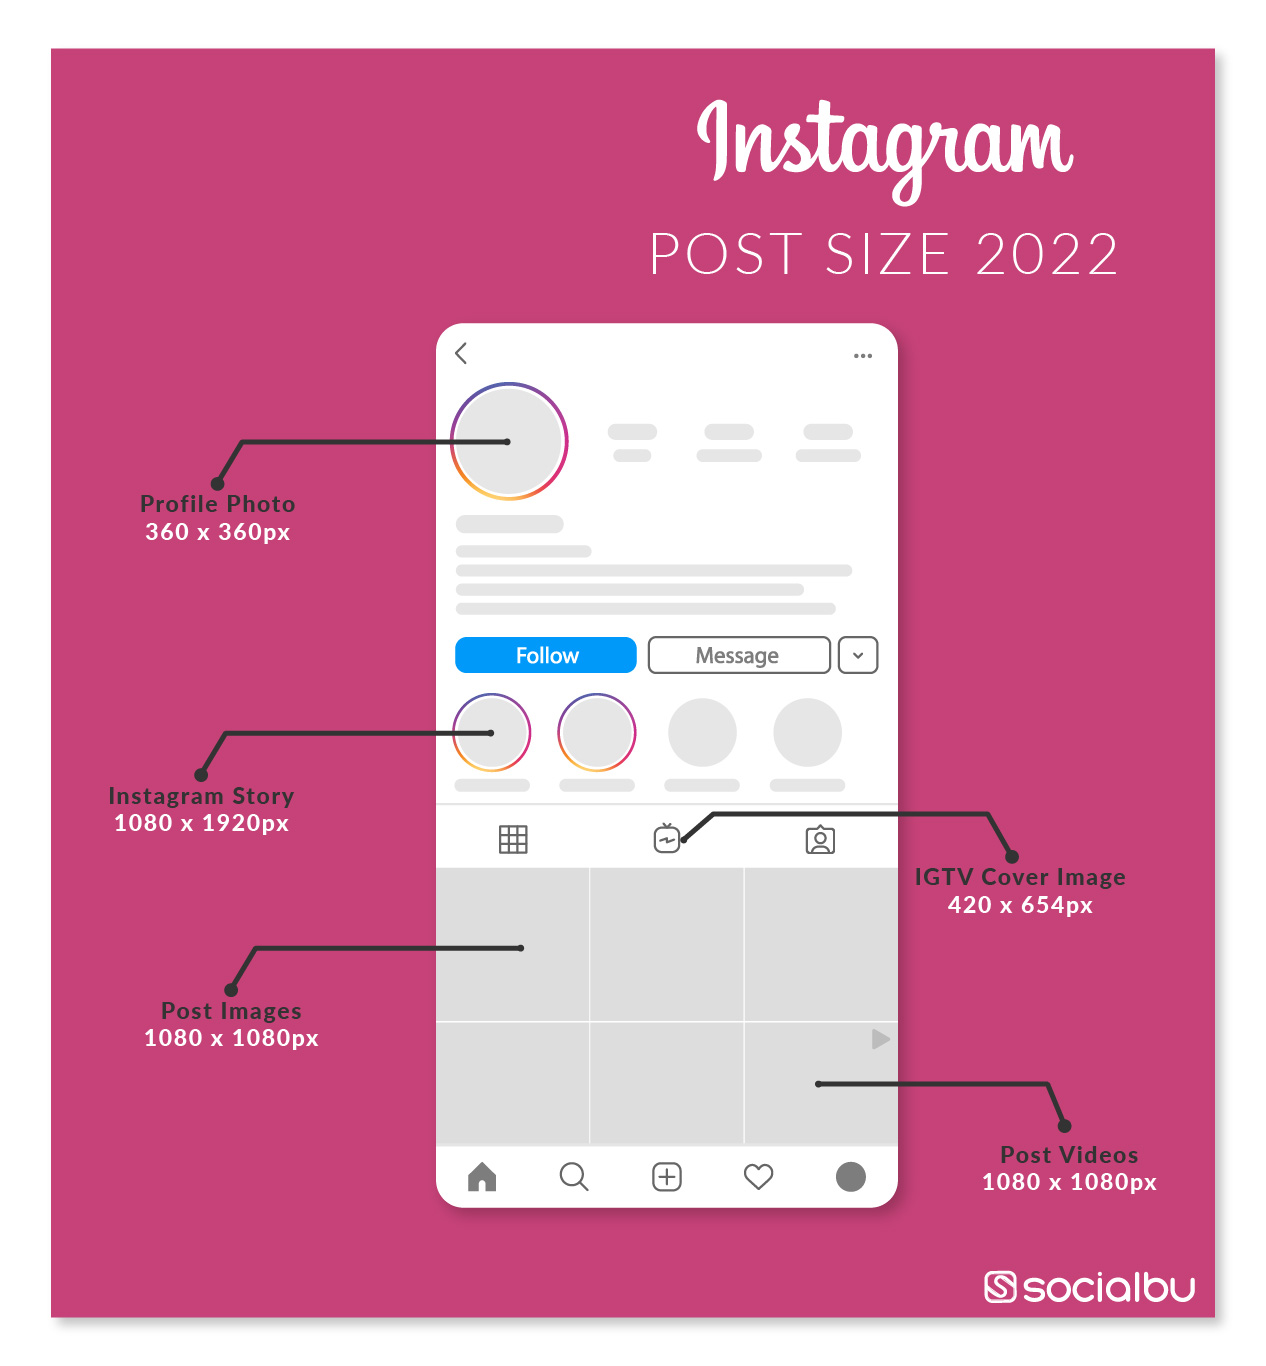 What Are The Instagram Posts & Story Dimensions For 2022? | SocialBu